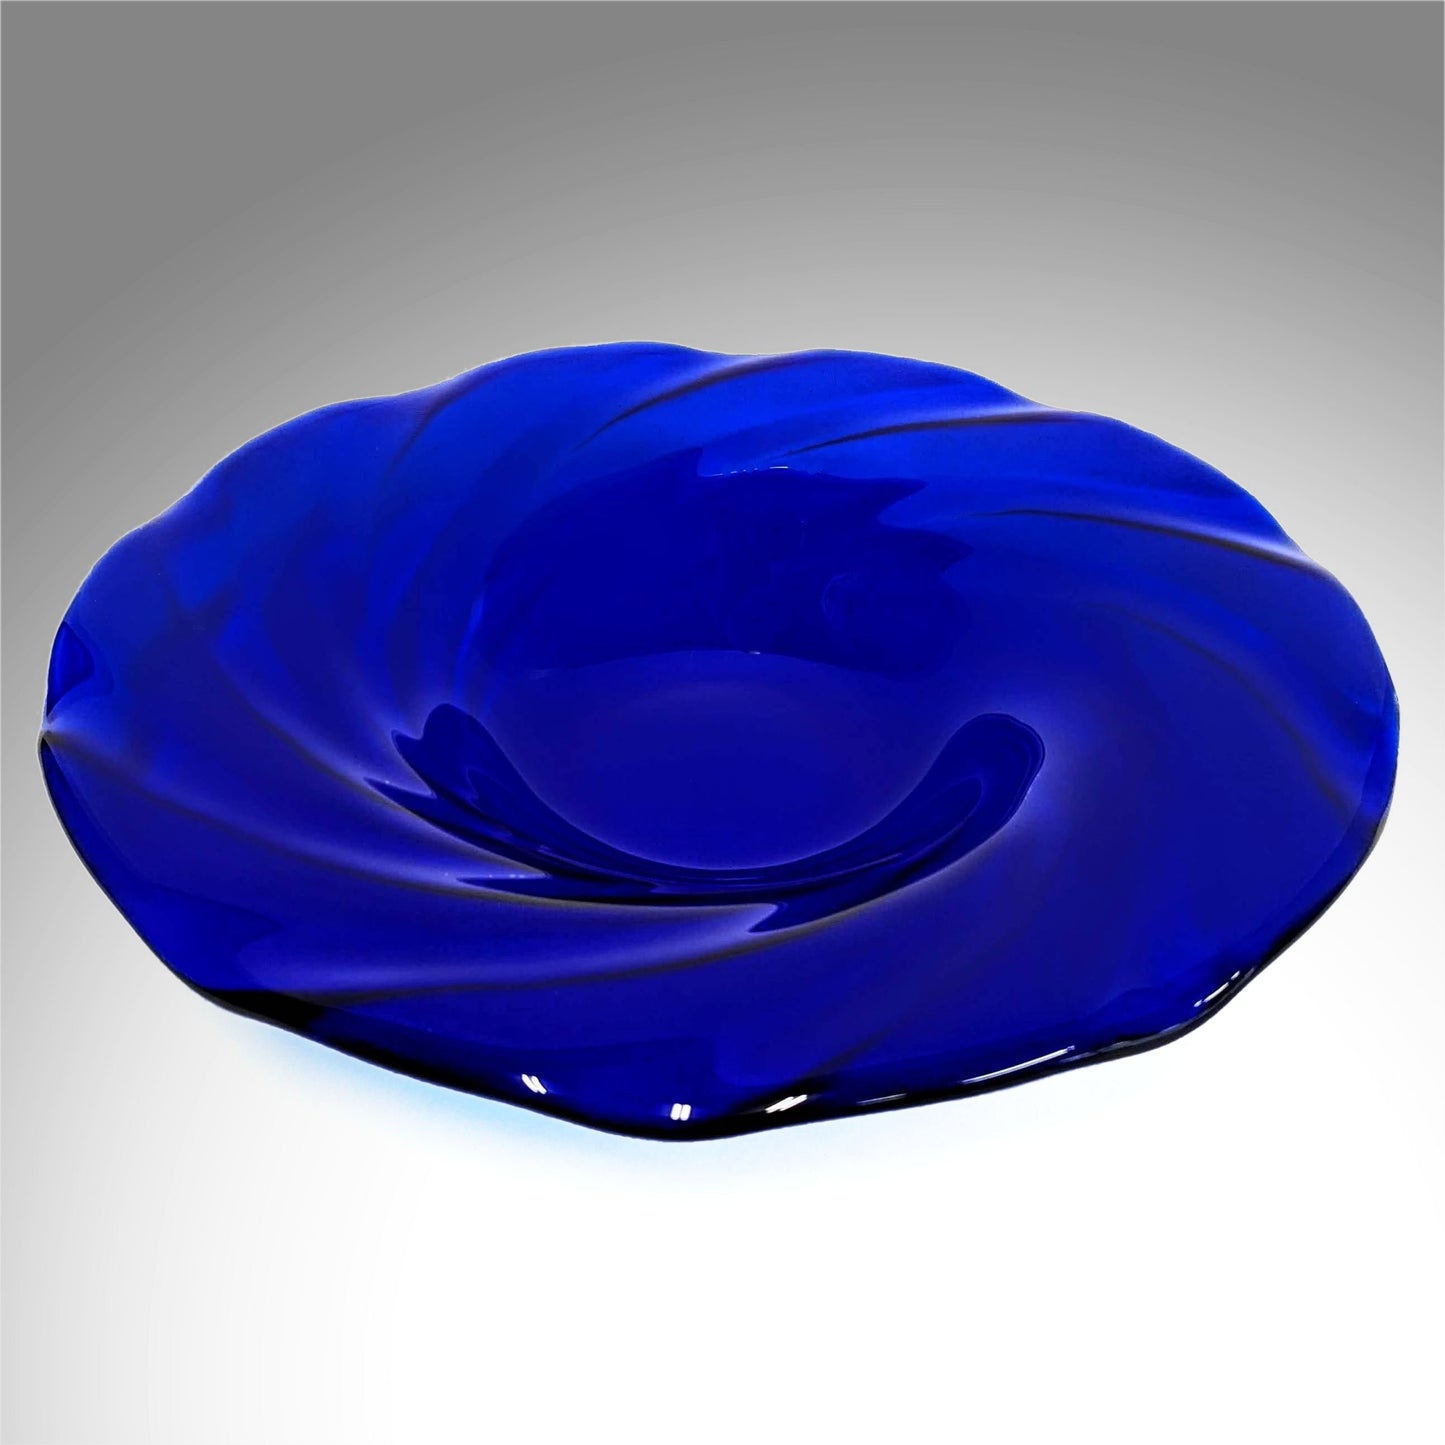 Cobalt Blue Glass Art Decorative Bowl | Handcrafted Fused Glass Gifts